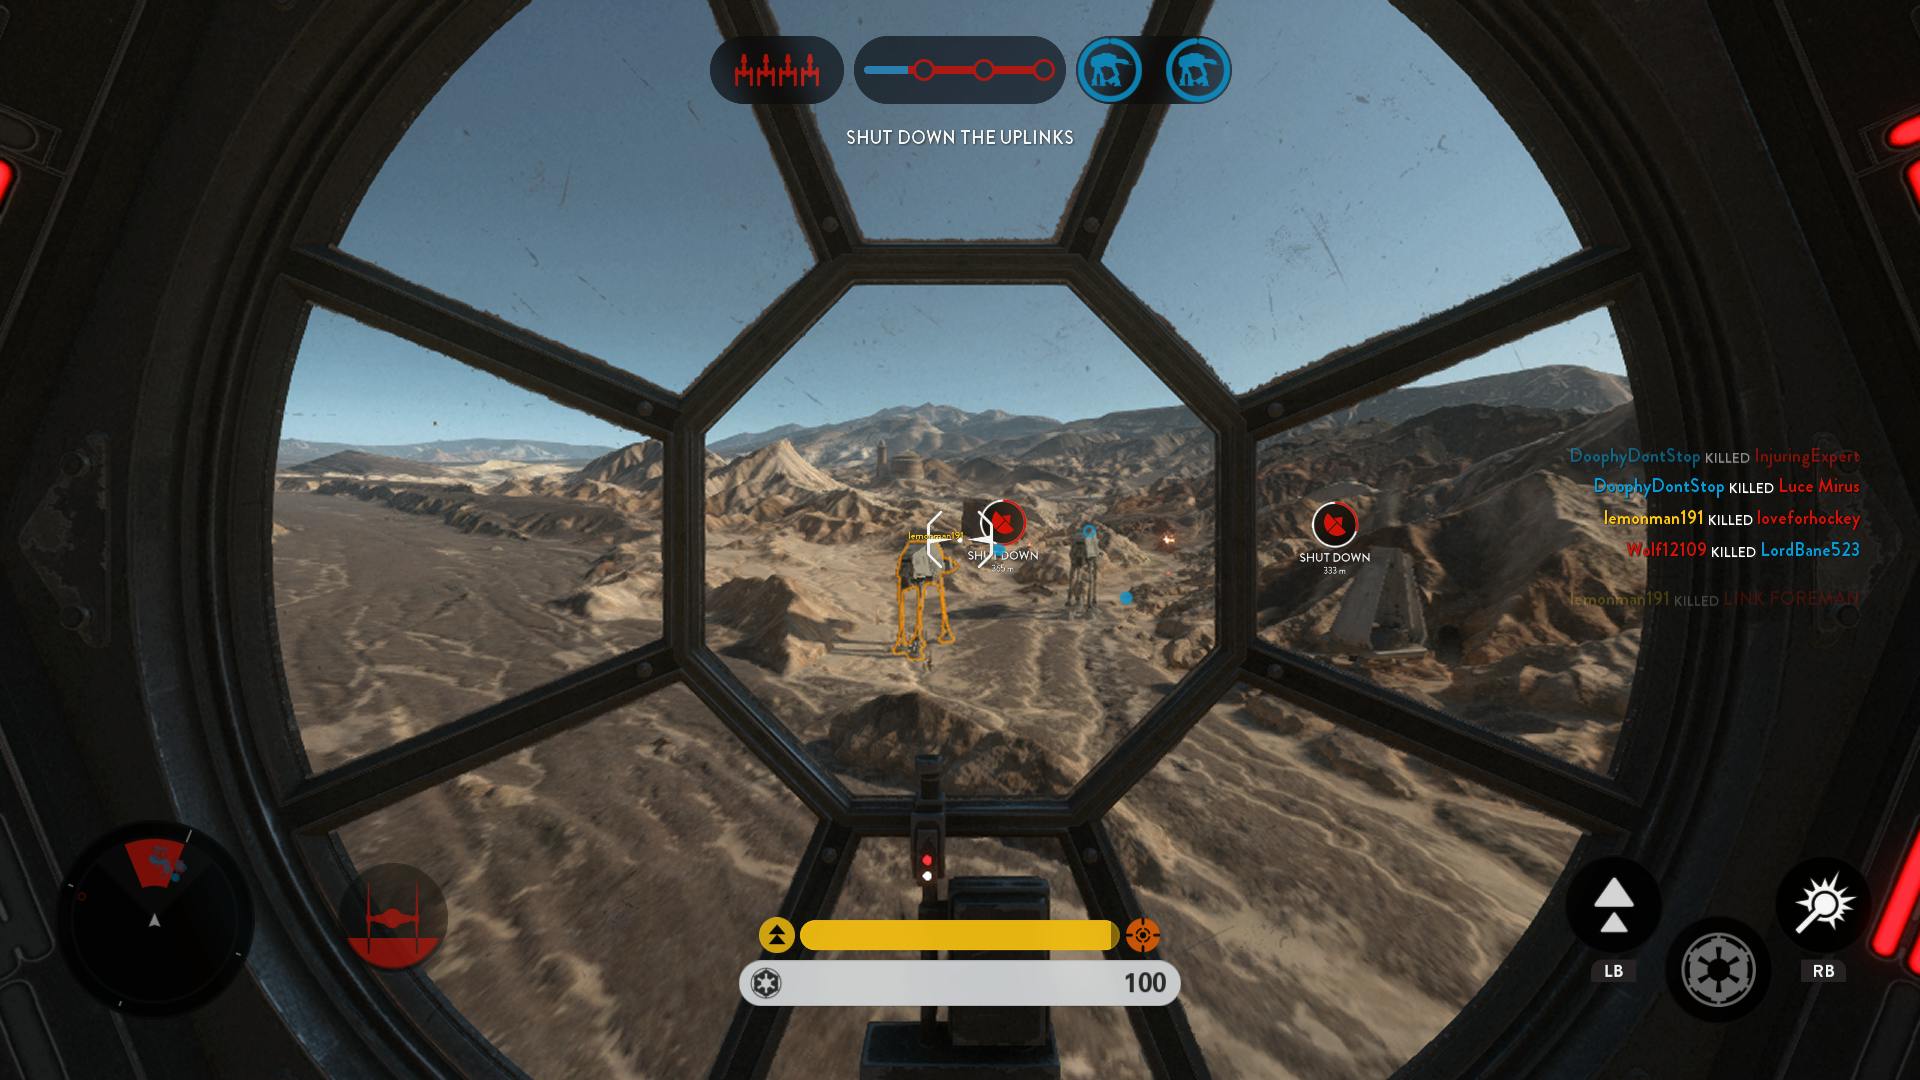 I'd much rather be driving that AT-AT than flying in this TIE Fighter, but my partner beat me to the AT-AT powerup. AGAIN.